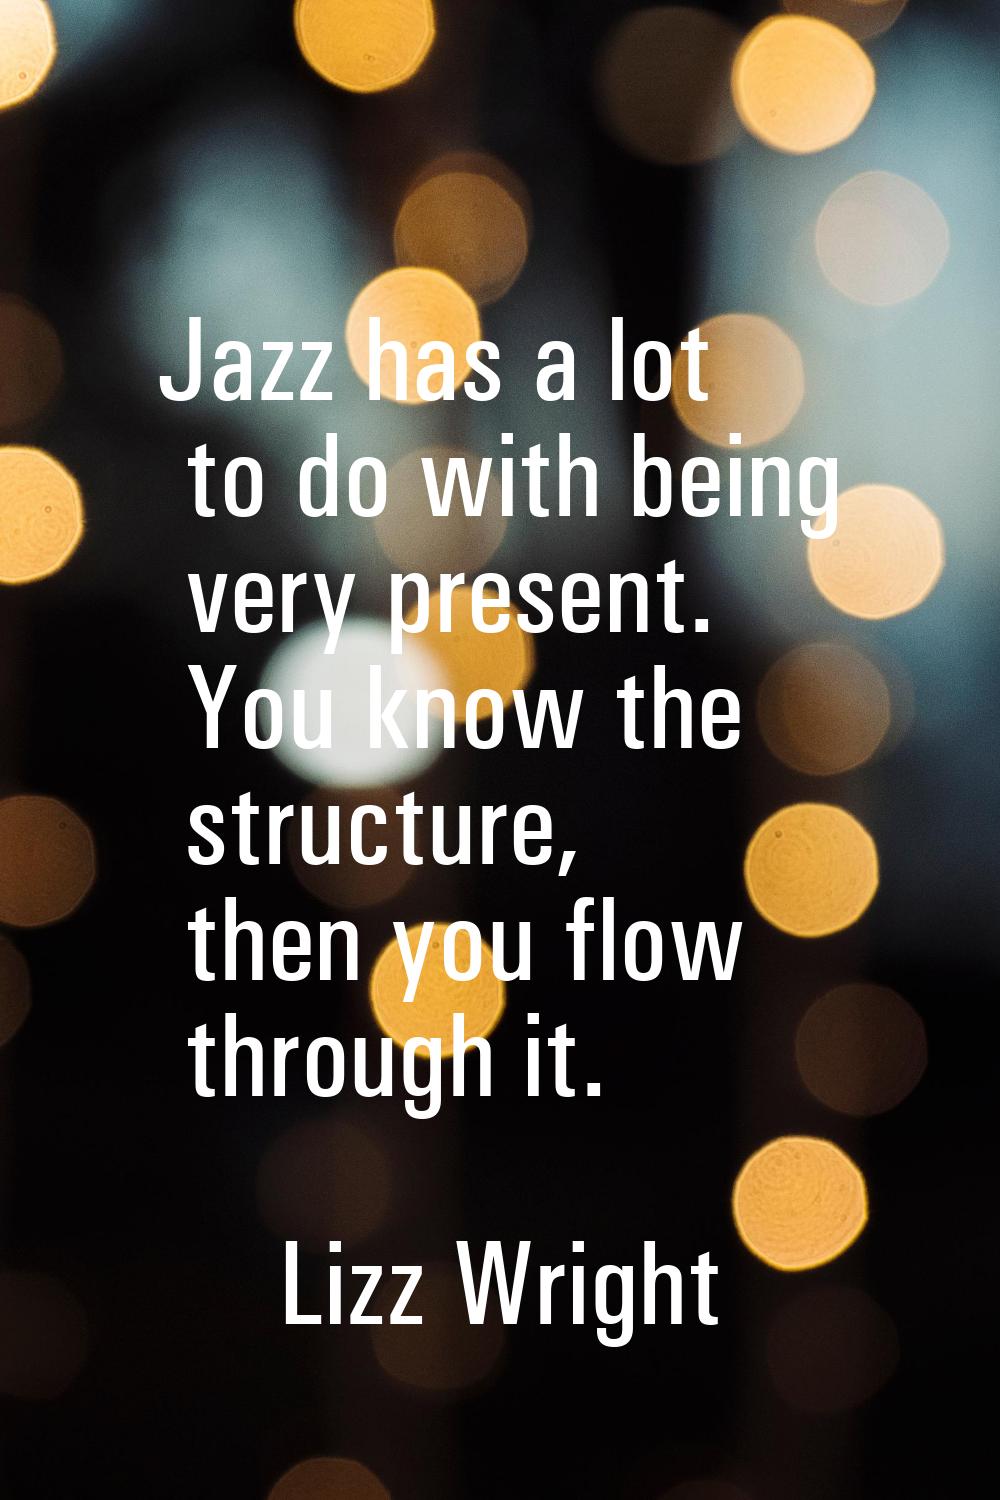 Jazz has a lot to do with being very present. You know the structure, then you flow through it.